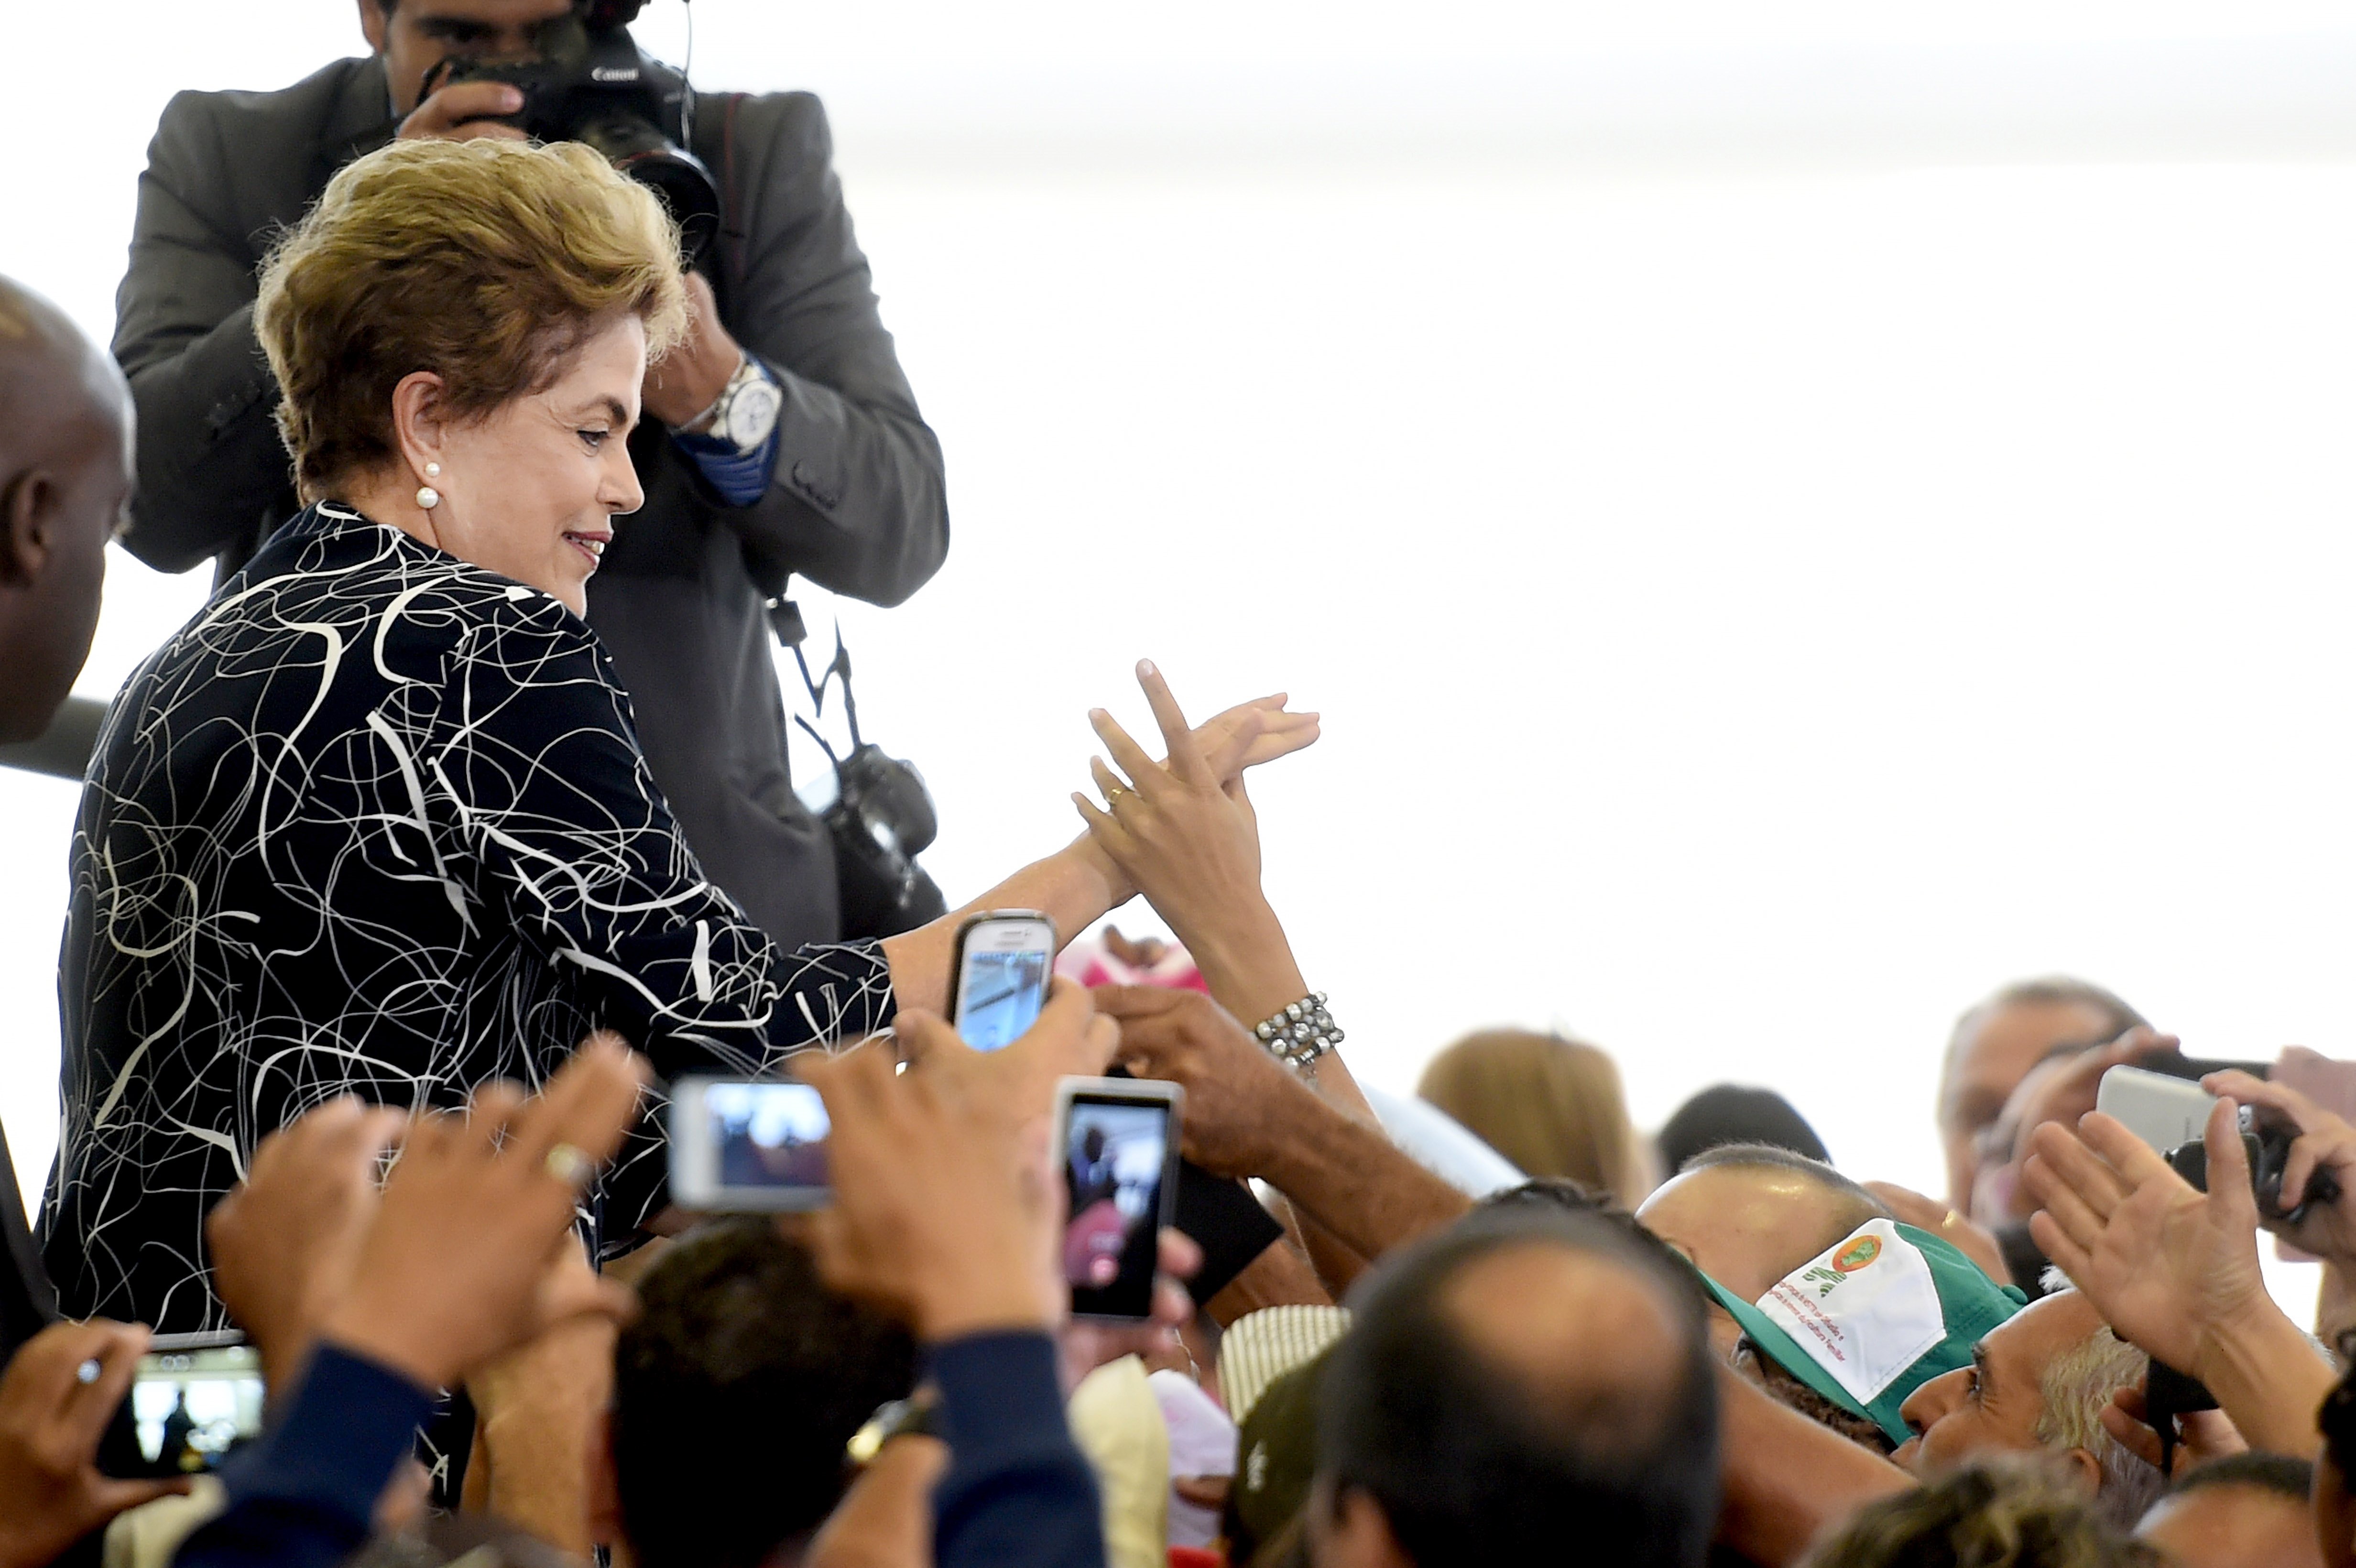 Brazil senate committee votes for Rousseff impeachment trial